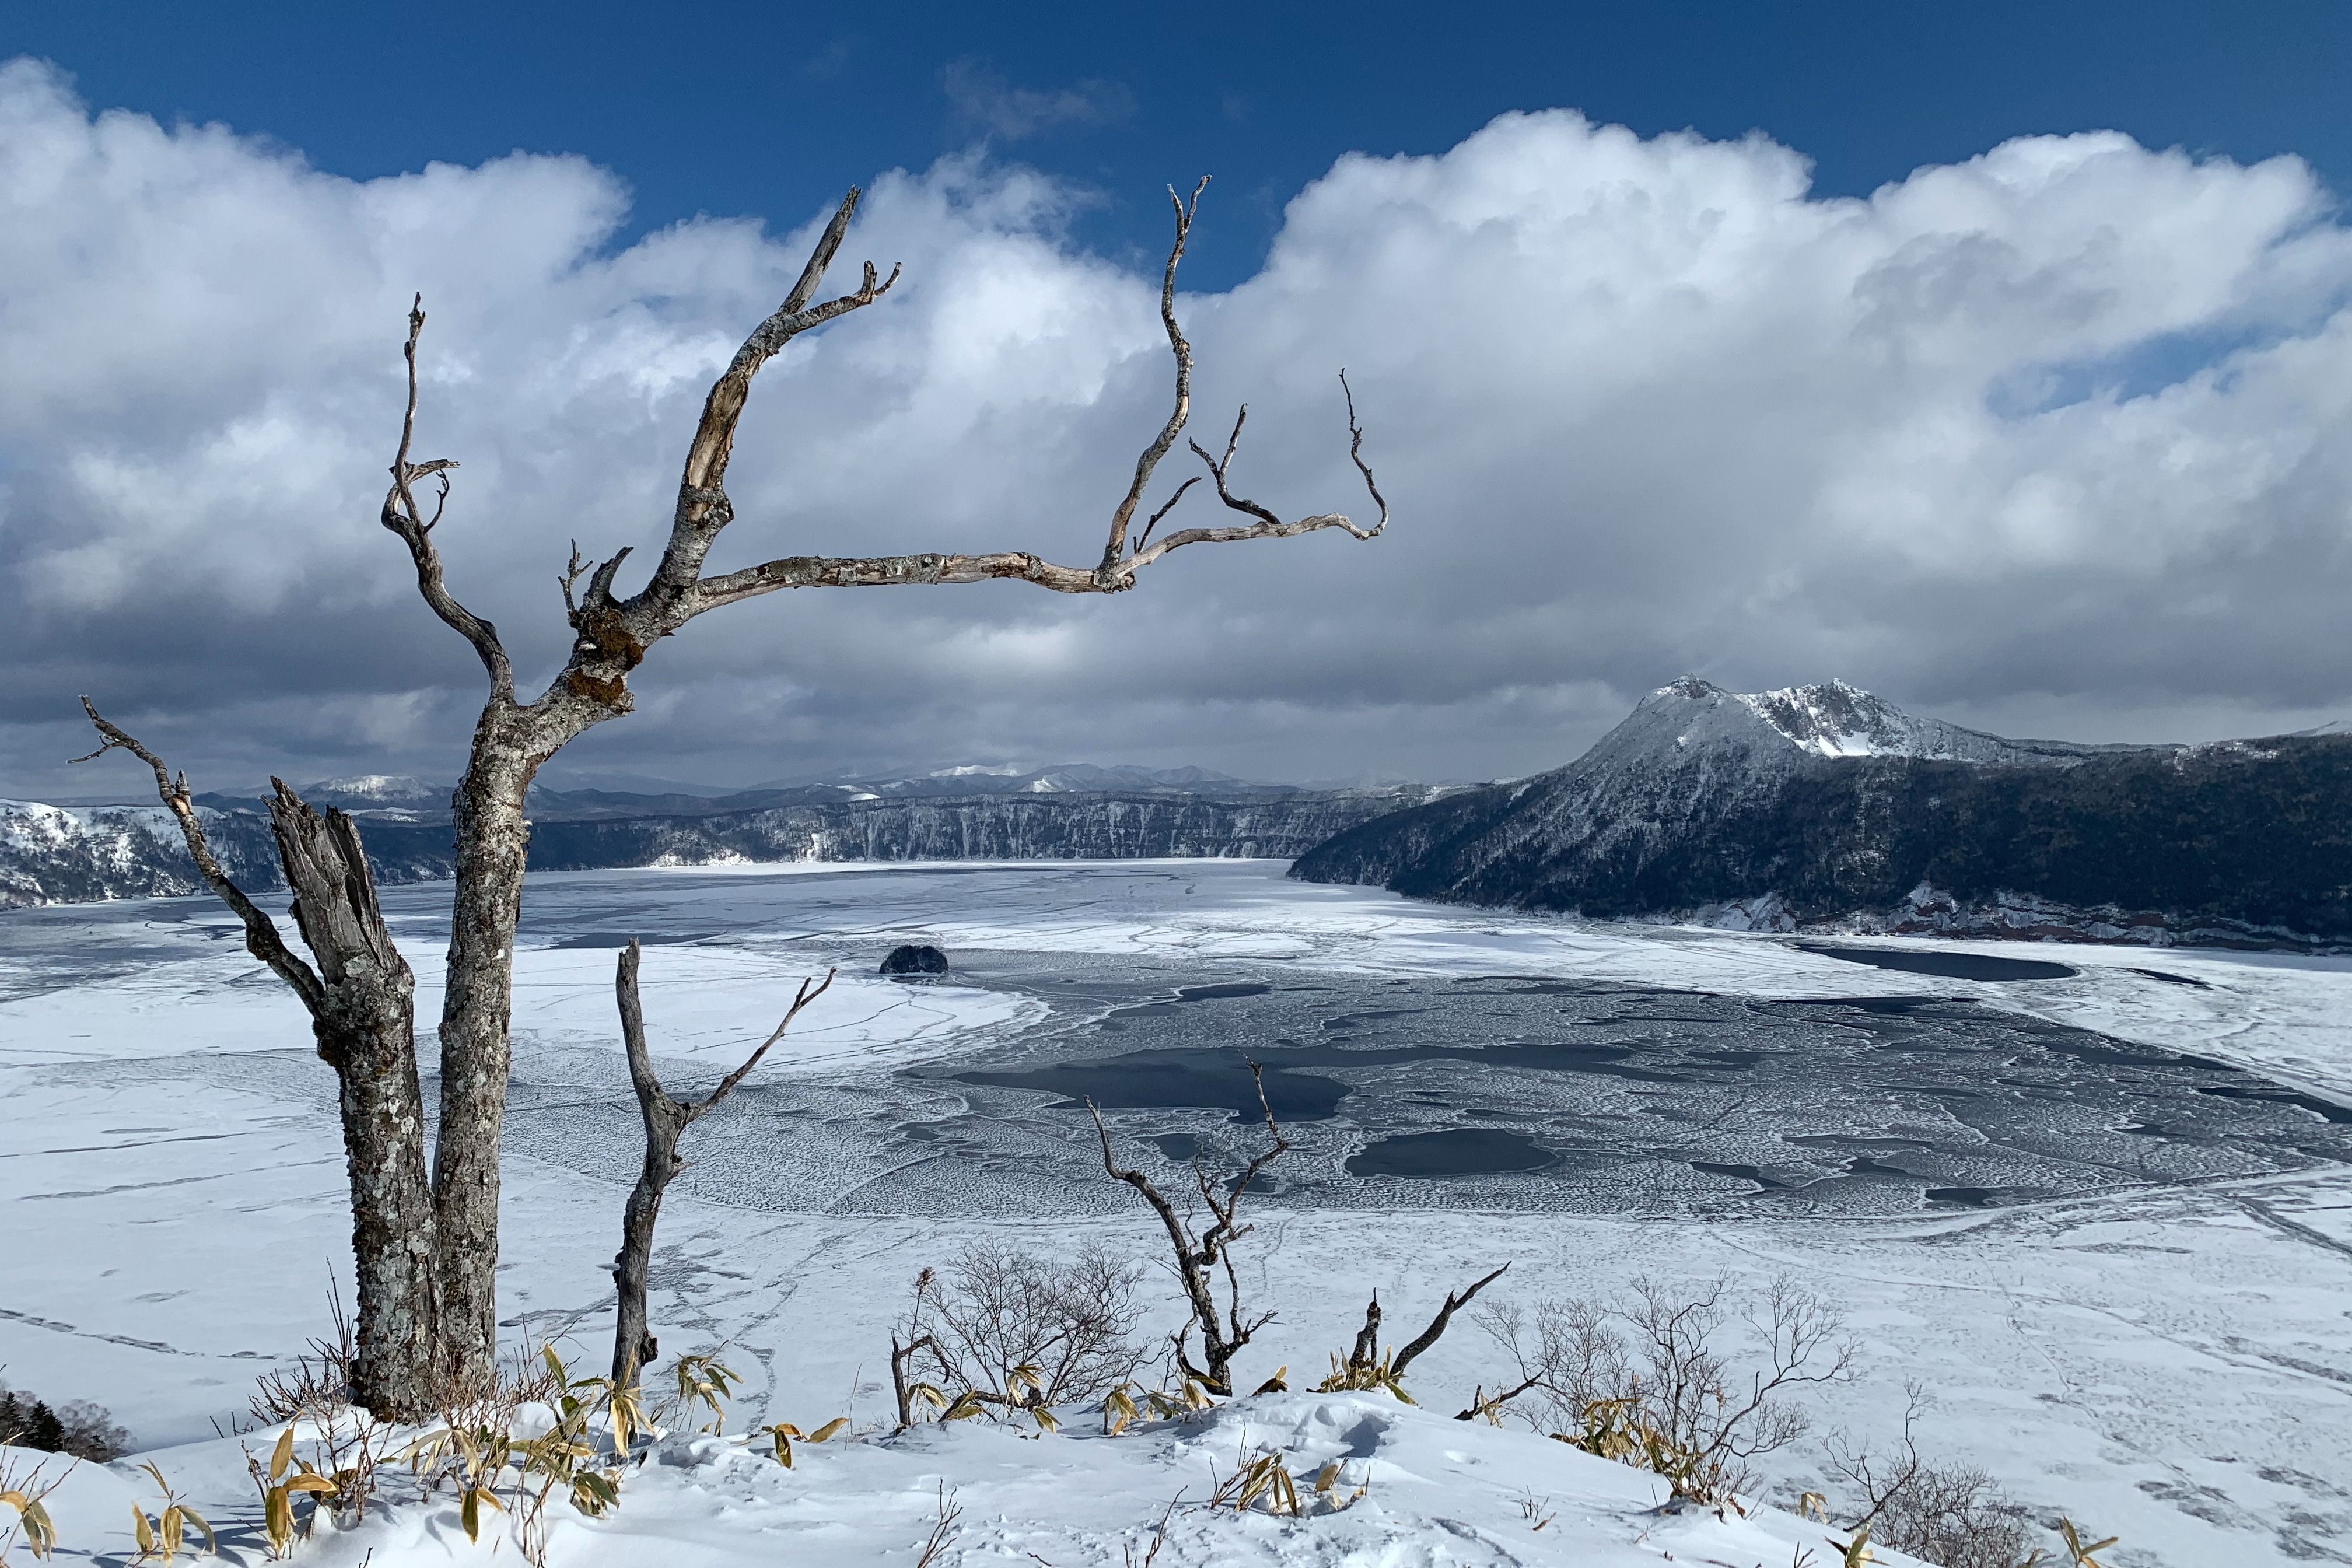 A view of Lake Mashu in winter from a view point. The surface of the lake is covered in big plates of ice. It is a beautiful day with blue sky above.